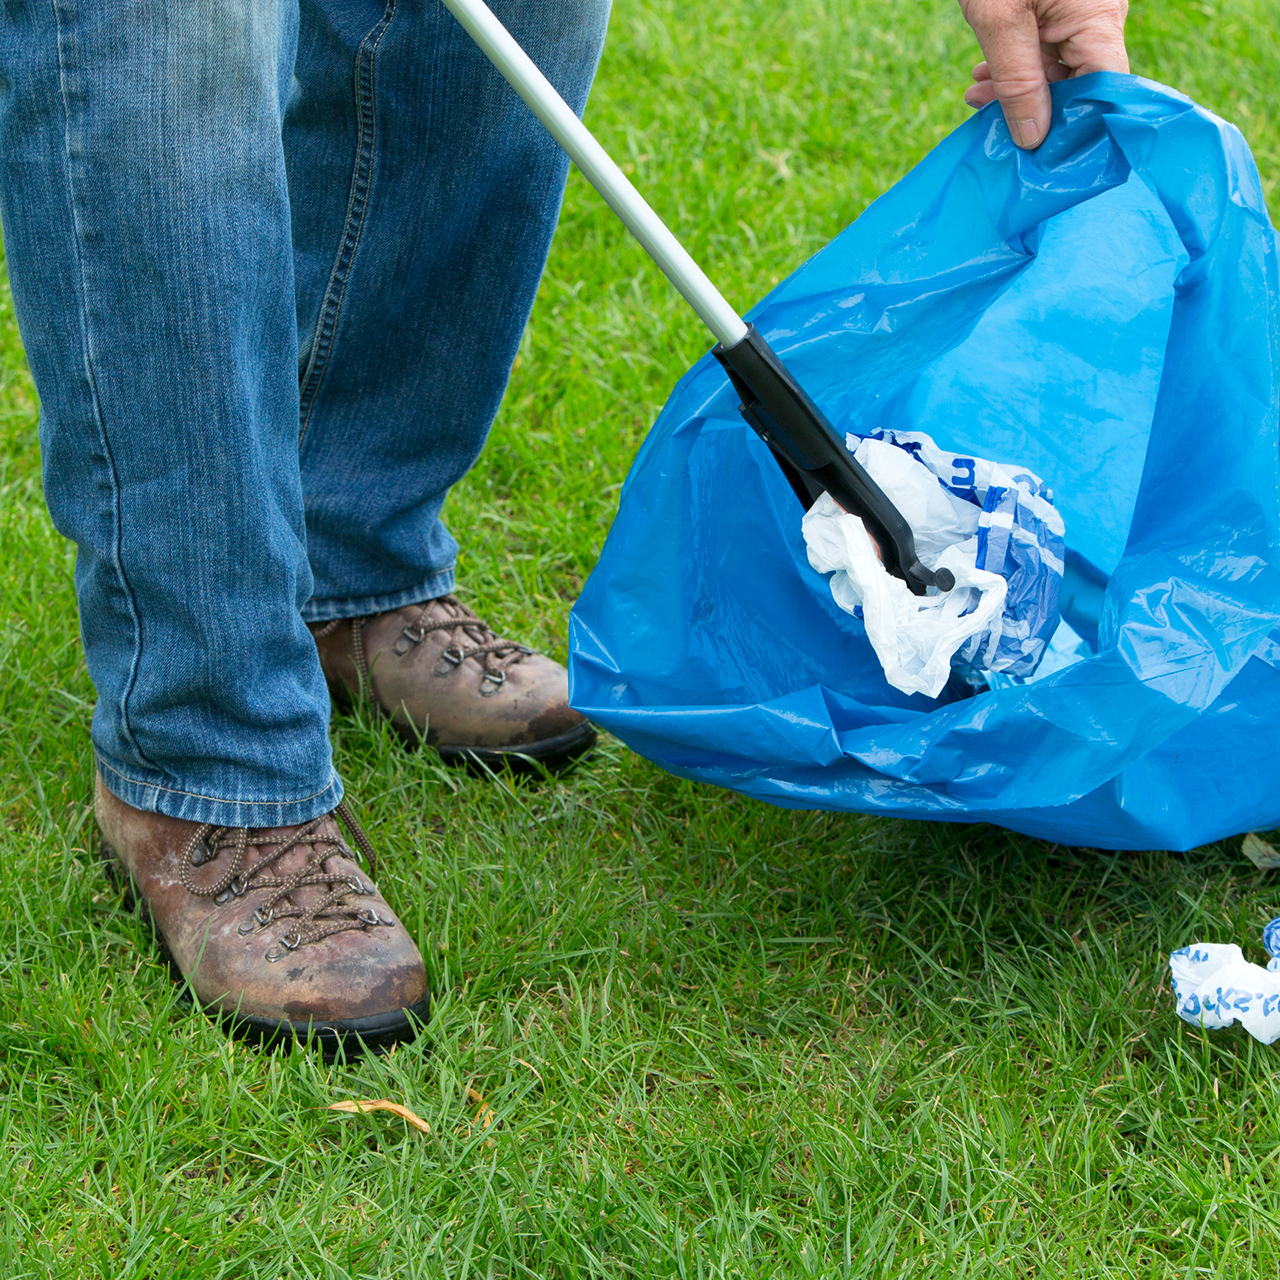 collecting litter with litter-picker and bag